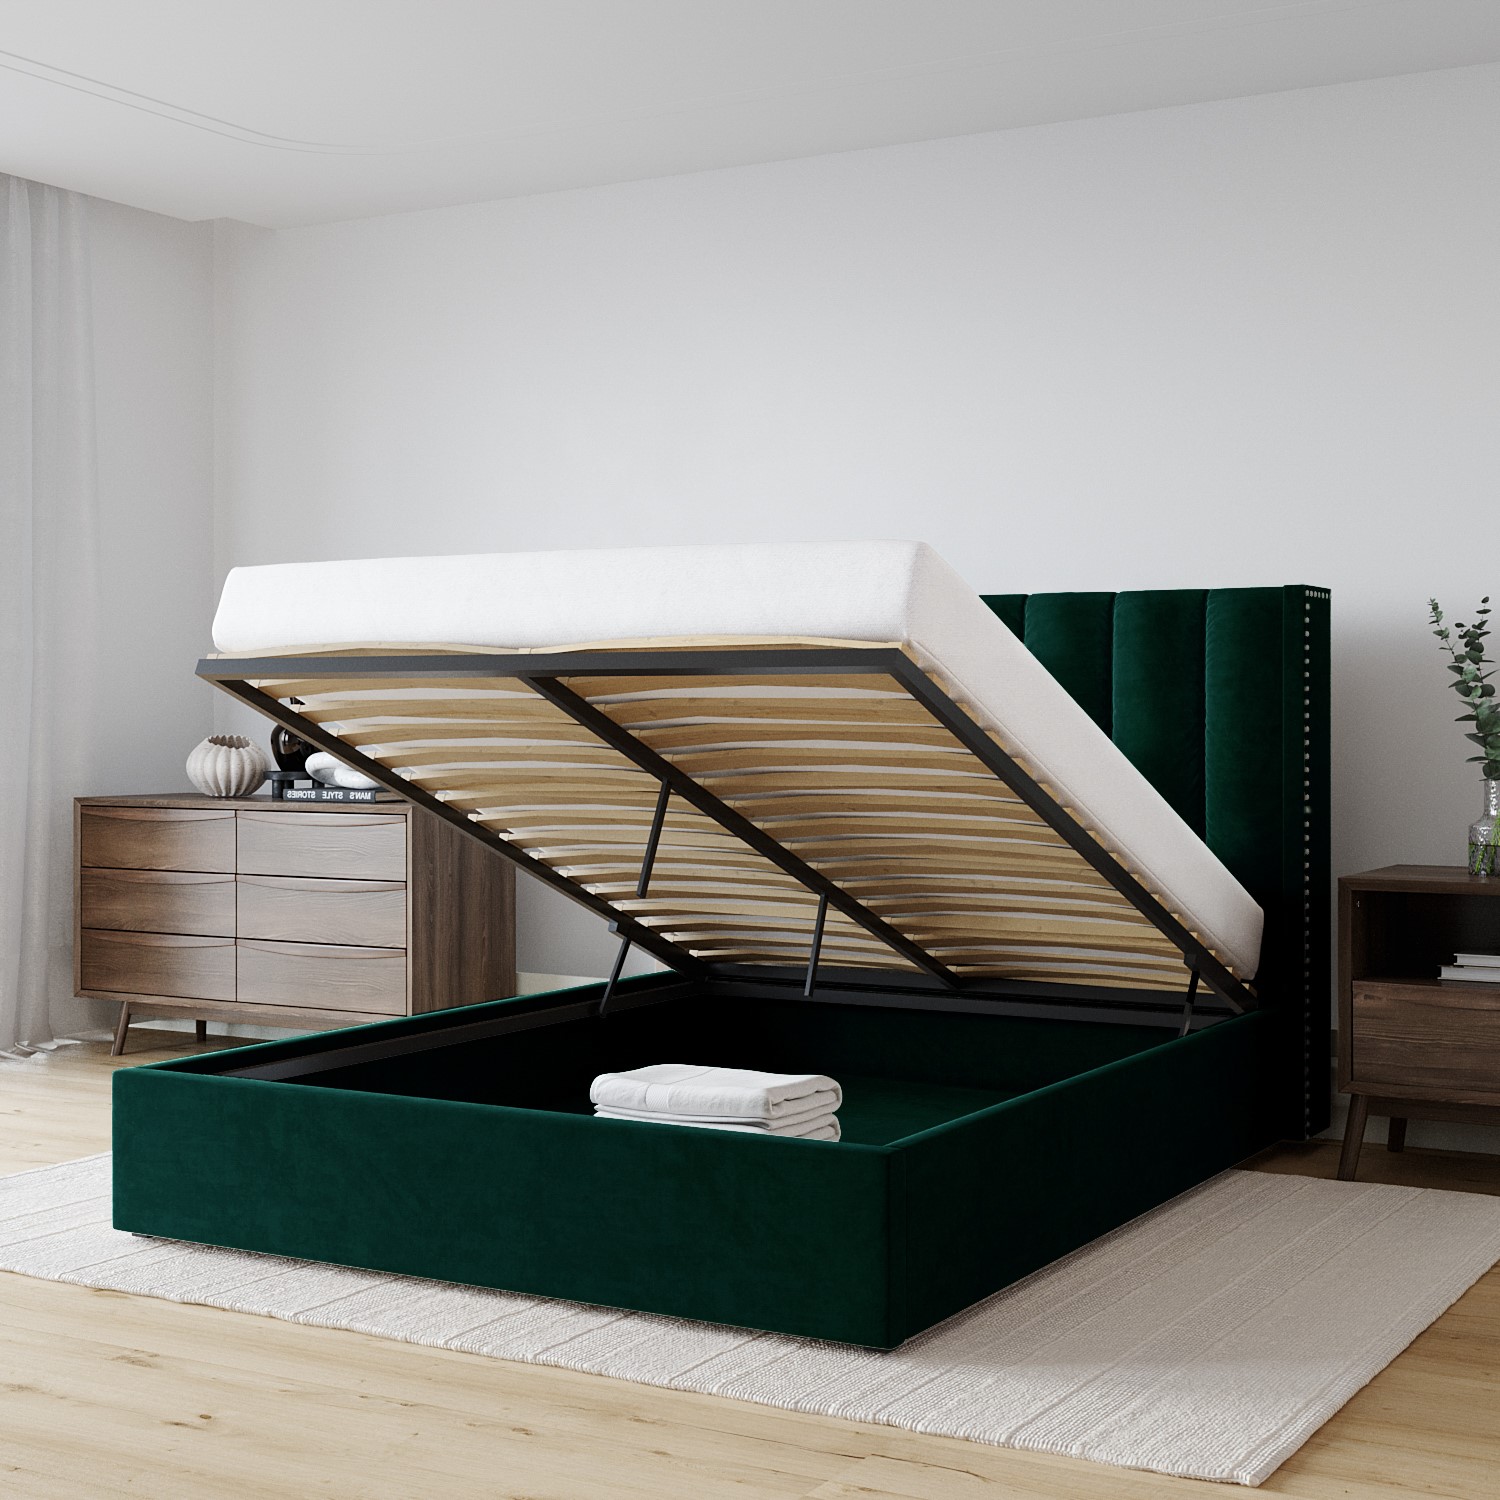 Read more about Green velvet double ottoman bed with winged headboard maddox